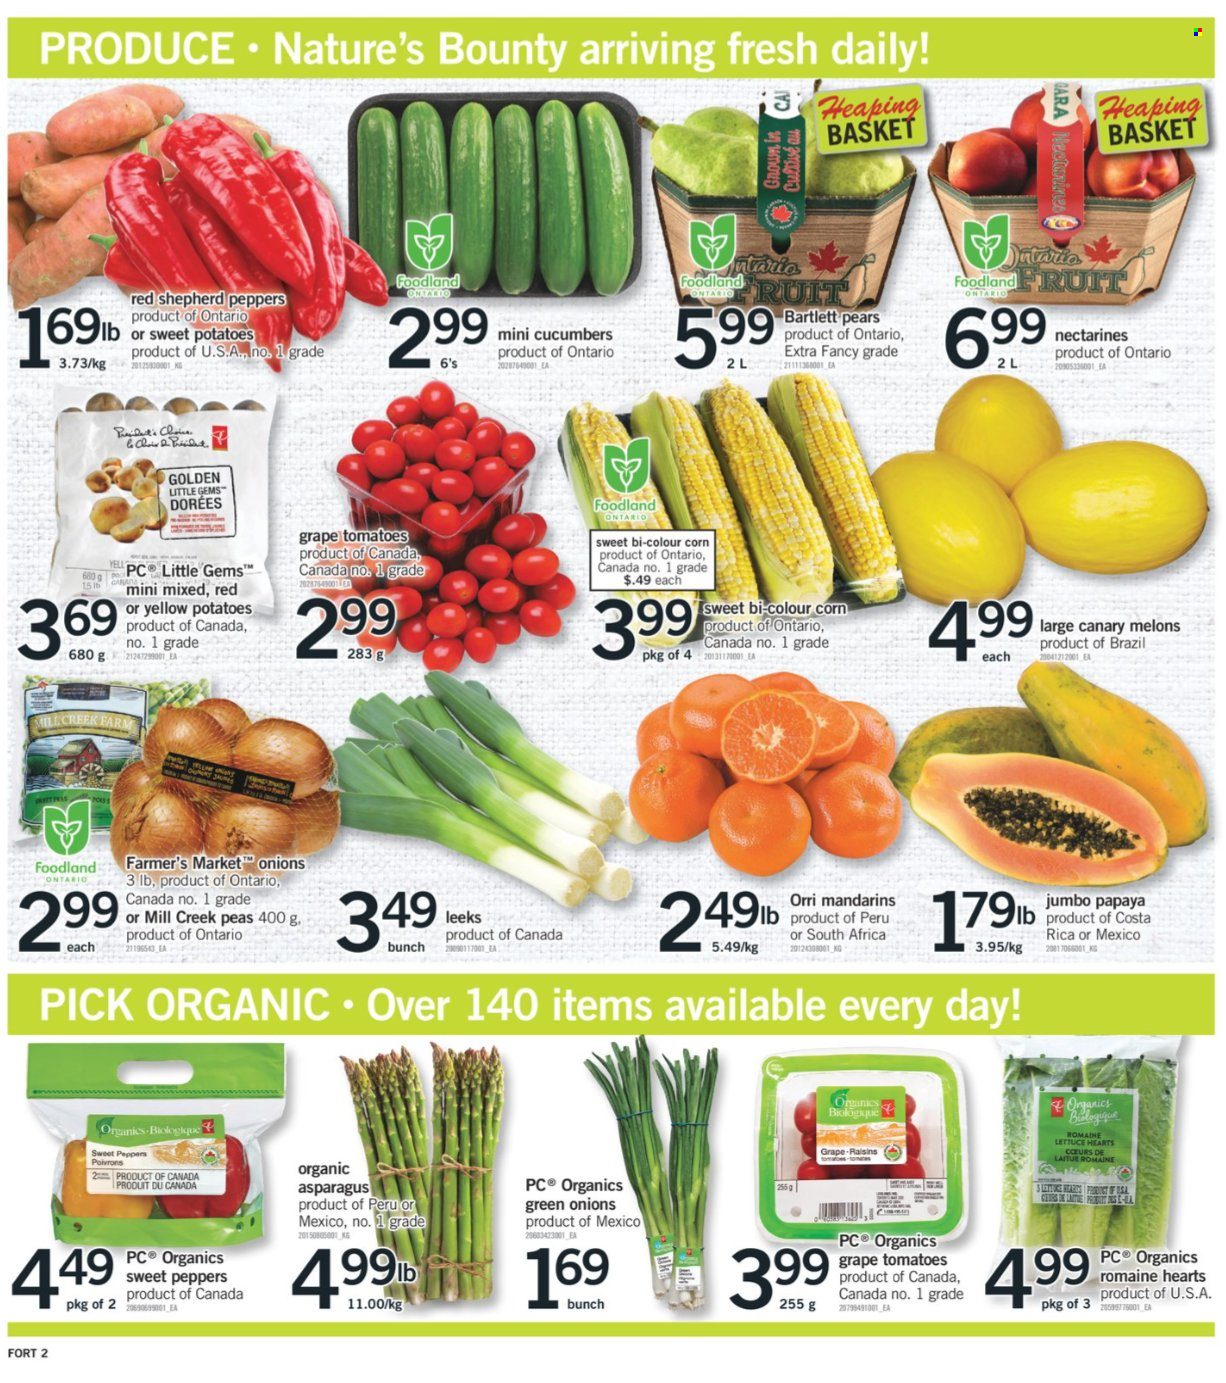 thumbnail - Fortinos Flyer - September 16, 2021 - September 22, 2021 - Sales products - asparagus, corn, cucumber, sweet peppers, sweet potato, tomatoes, potatoes, peas, lettuce, peppers, green onion, Bartlett pears, mandarines, nectarines, papaya, pears, melons, dried fruit, Nature's Bounty, basket, raisins. Page 2.